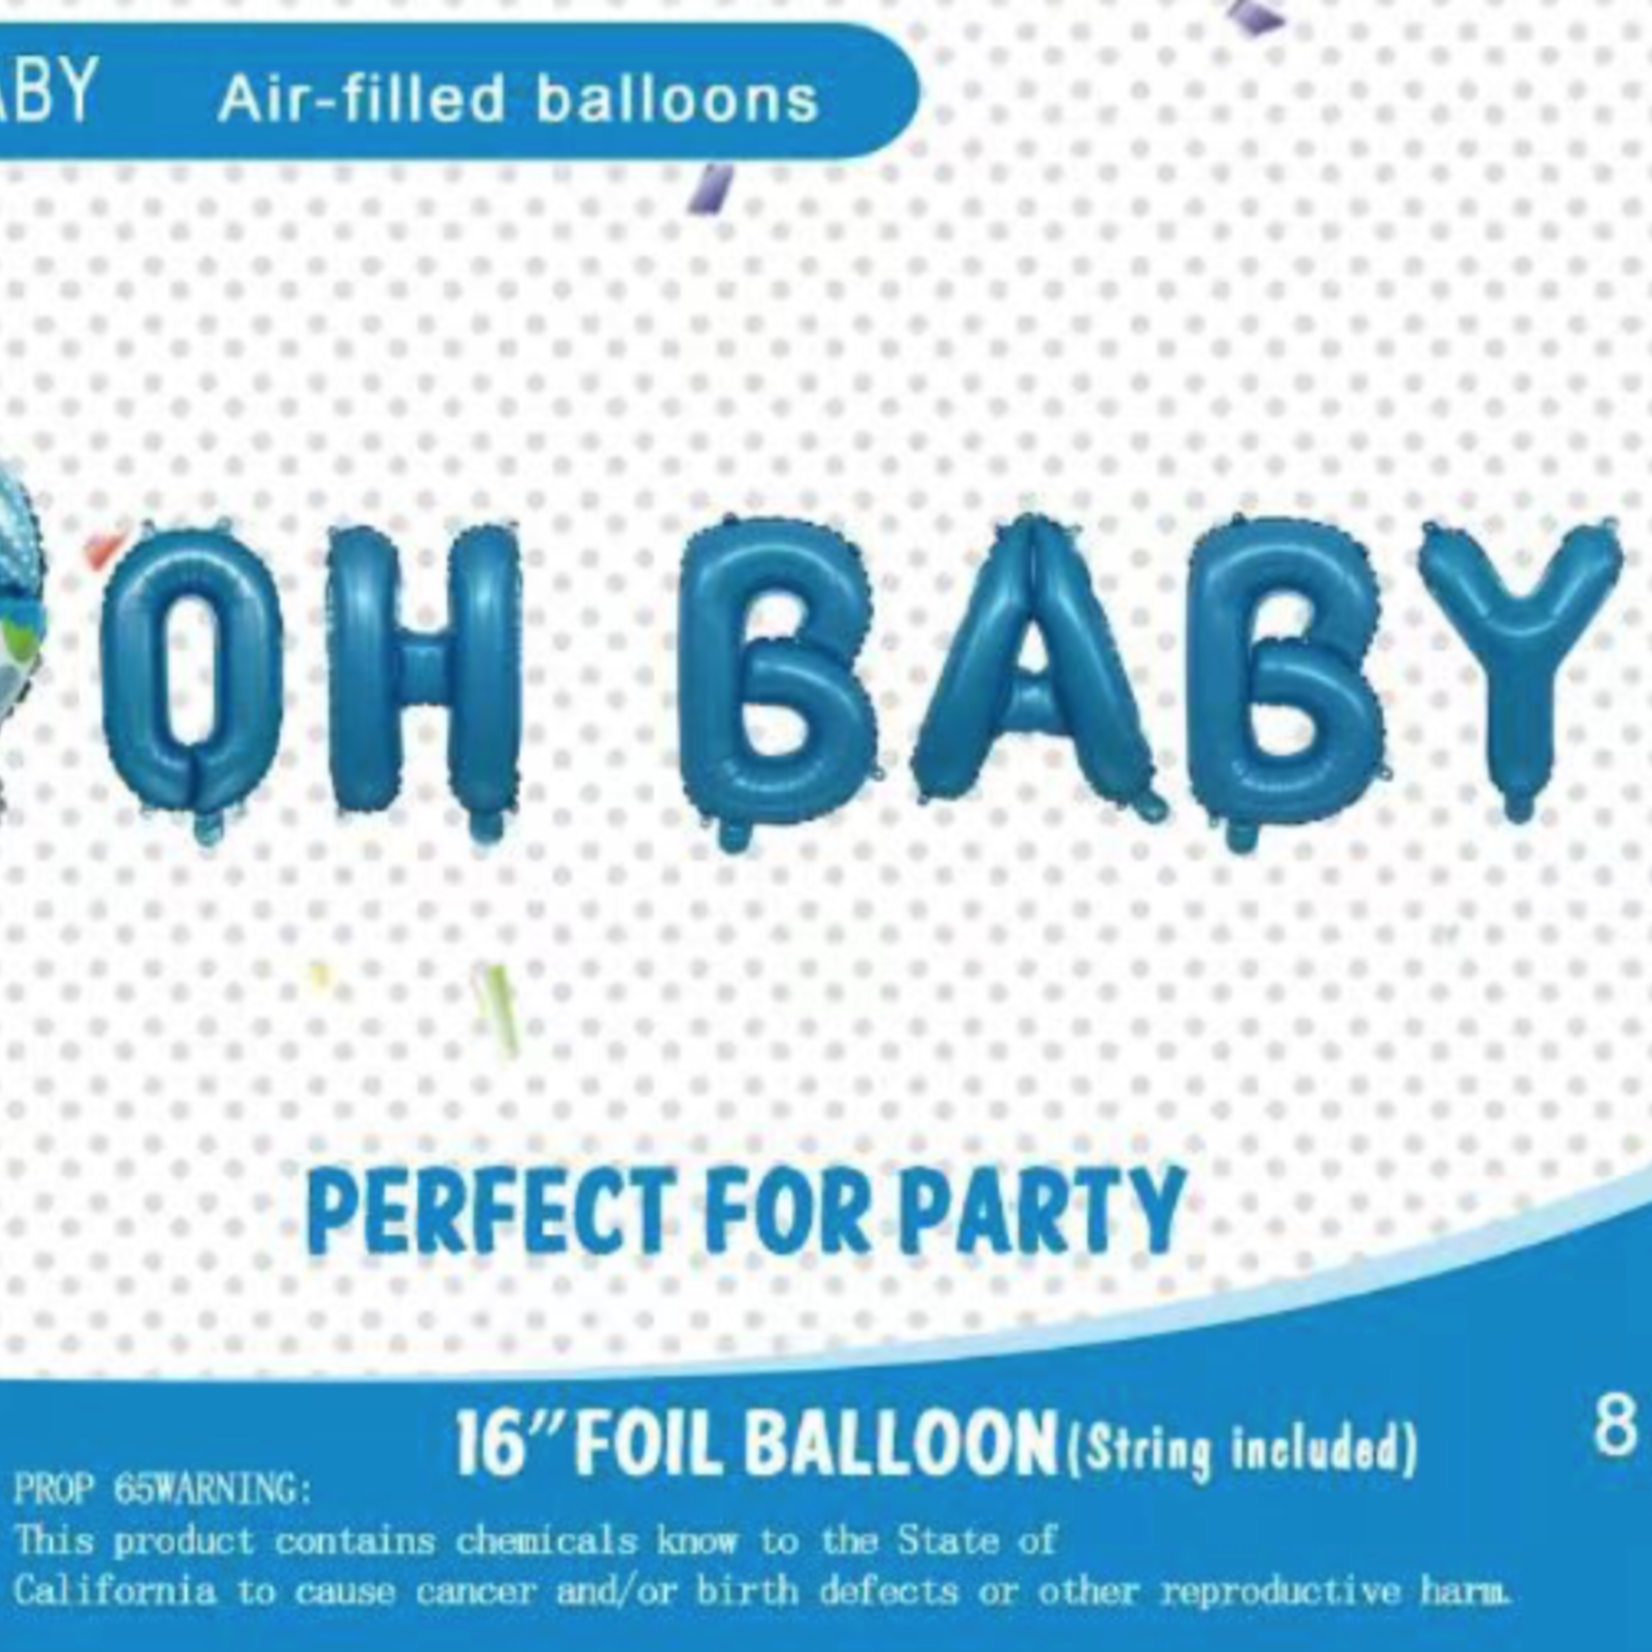 BLUE "OH BABY" BALLOON BANNER